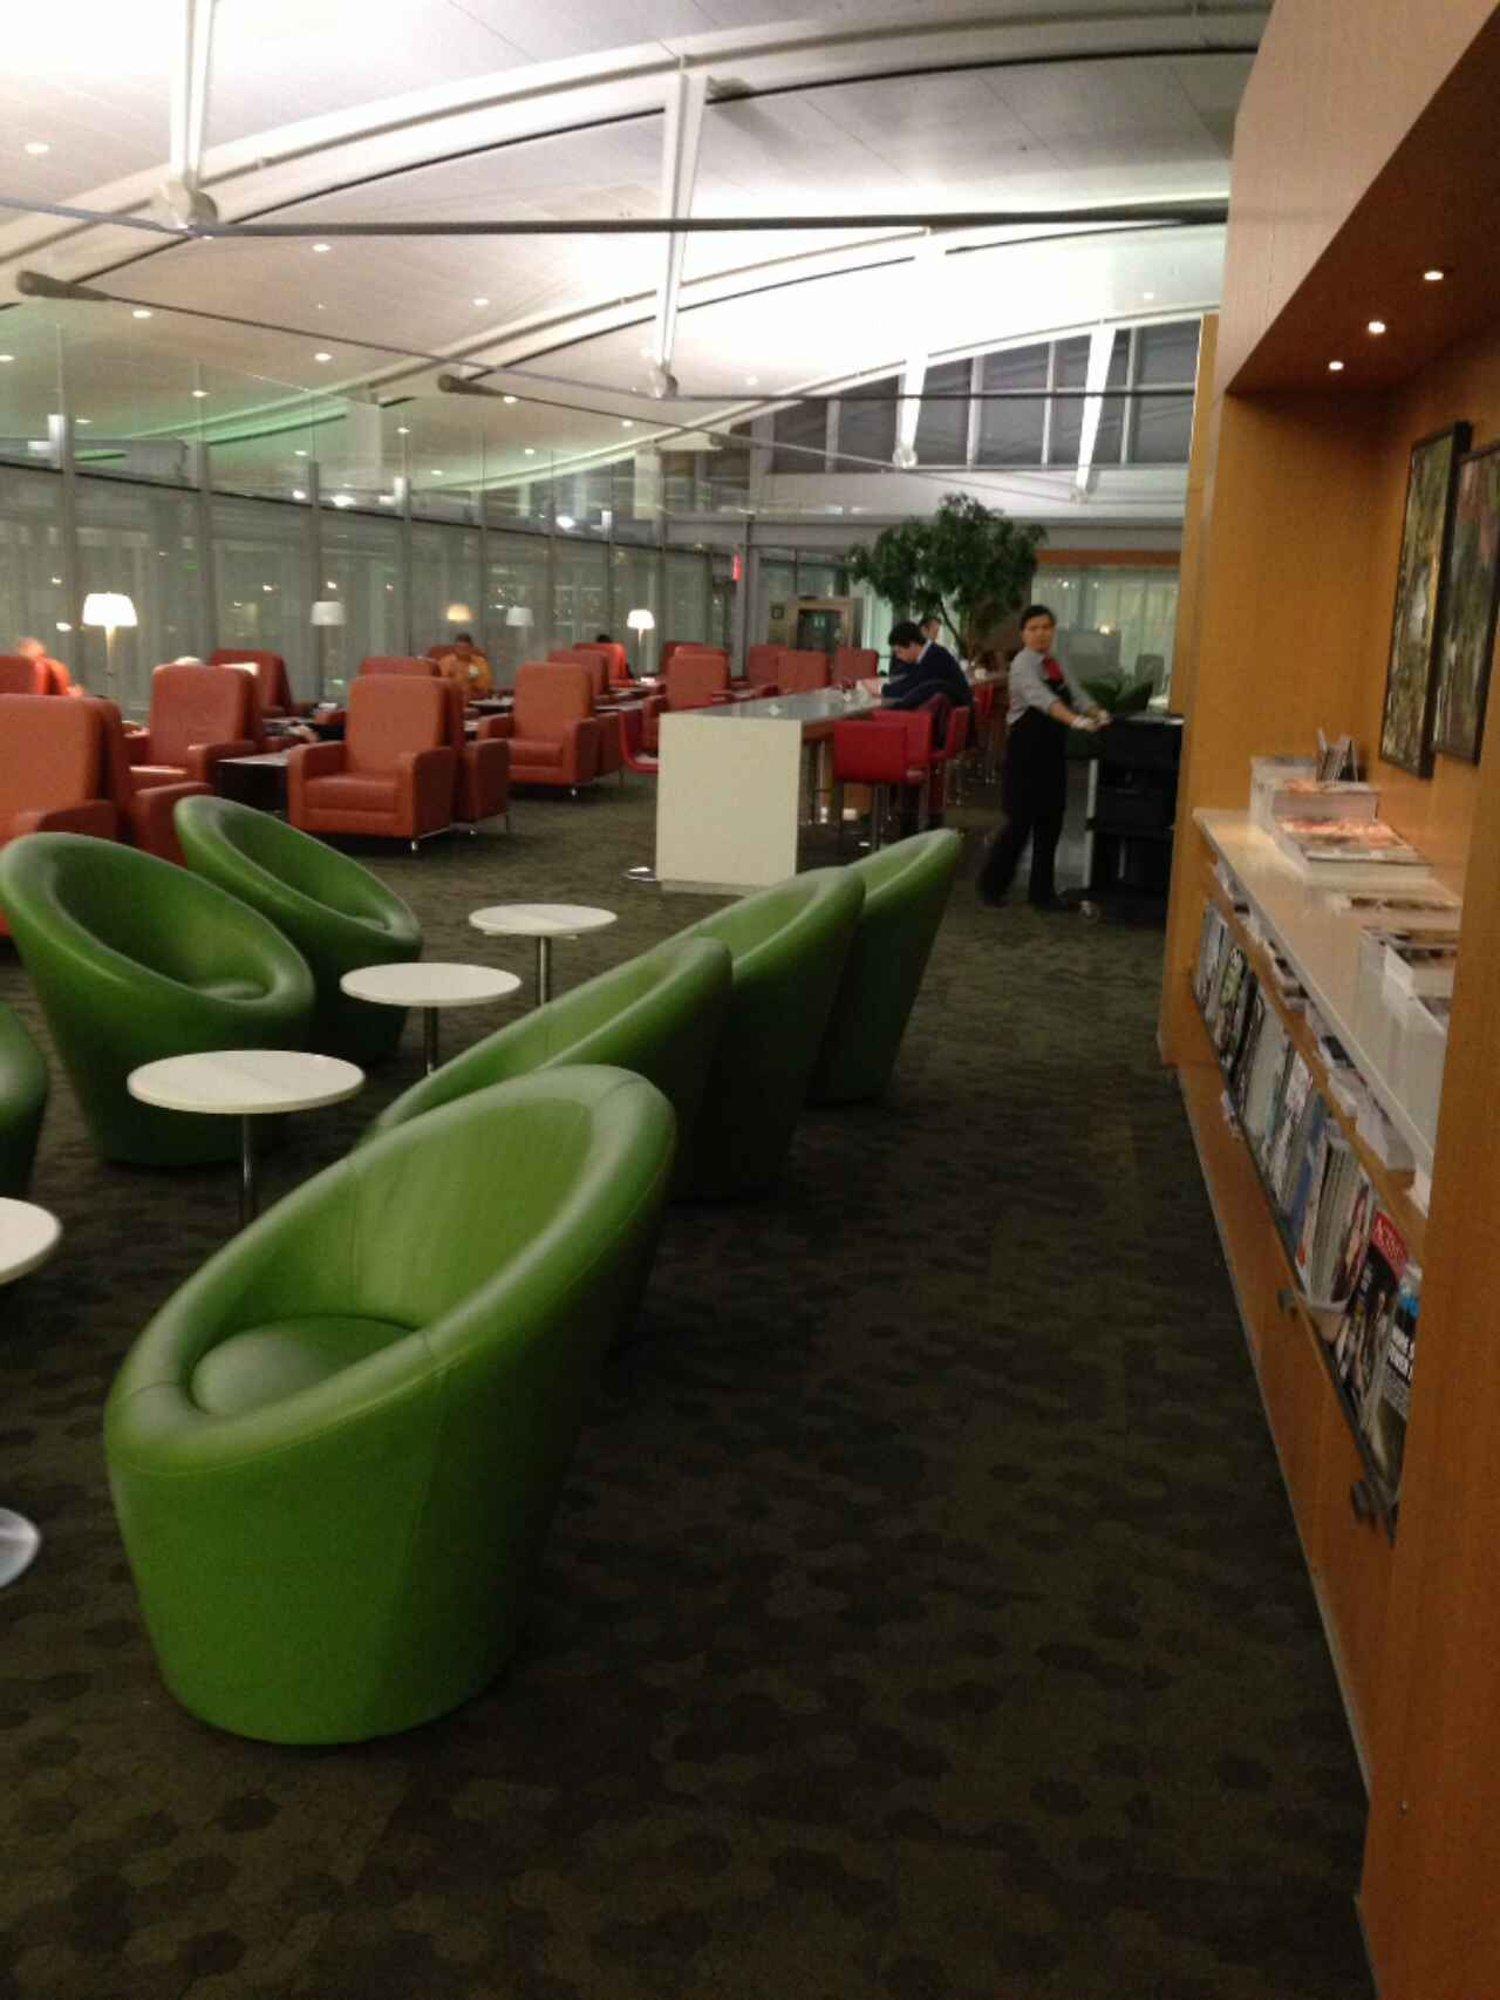 Air Canada Maple Leaf Lounge image 6 of 27